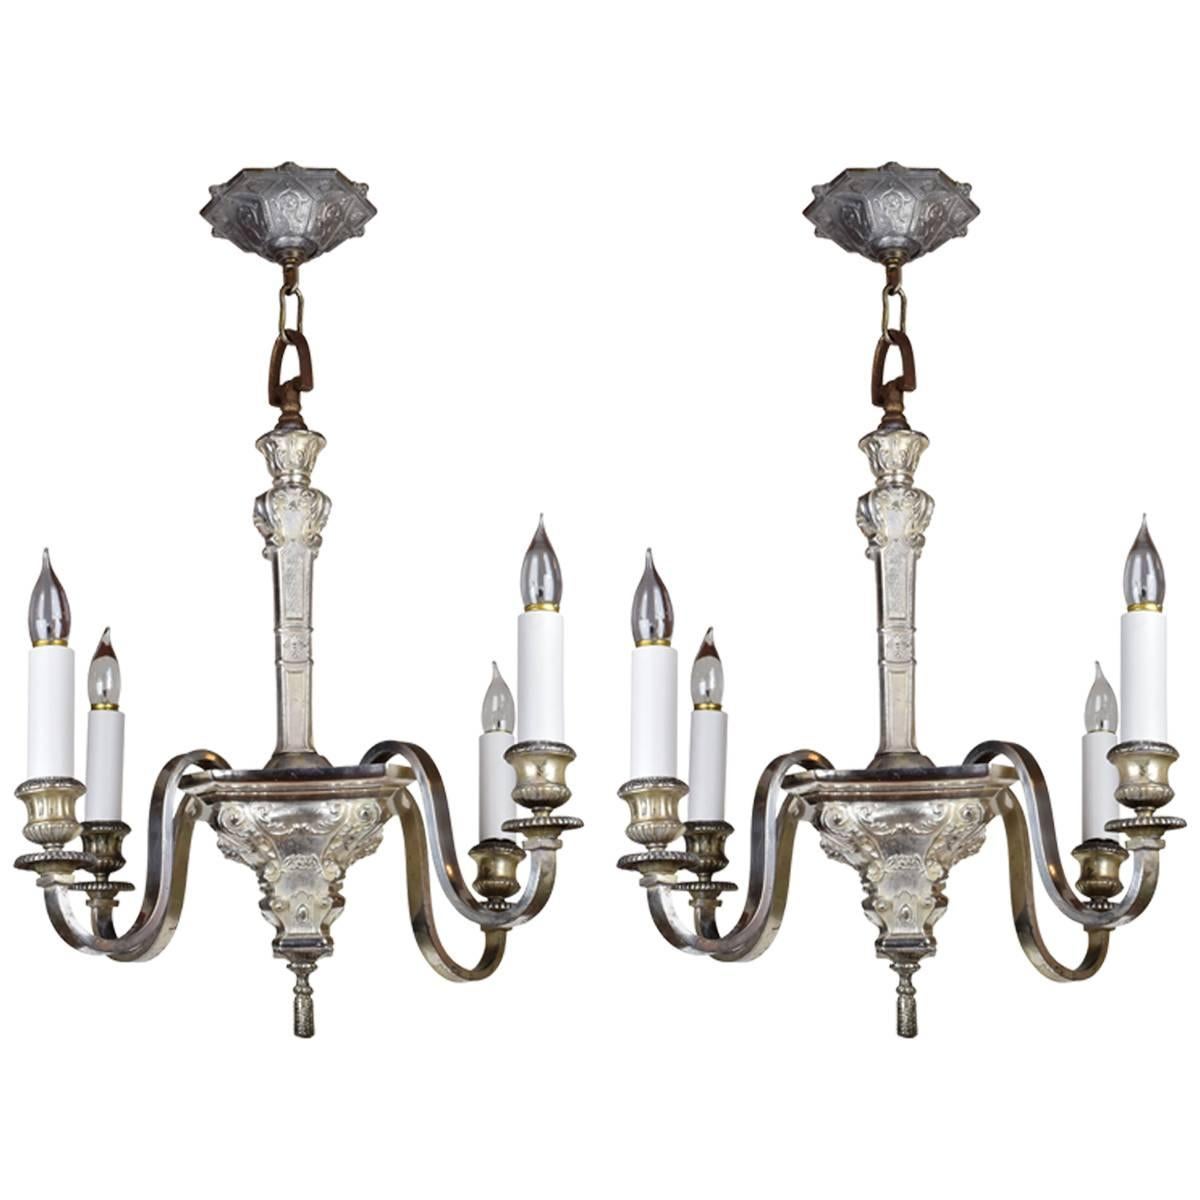 Early 20th Century American Empire Silver Plated Chandelier, Matching Pair